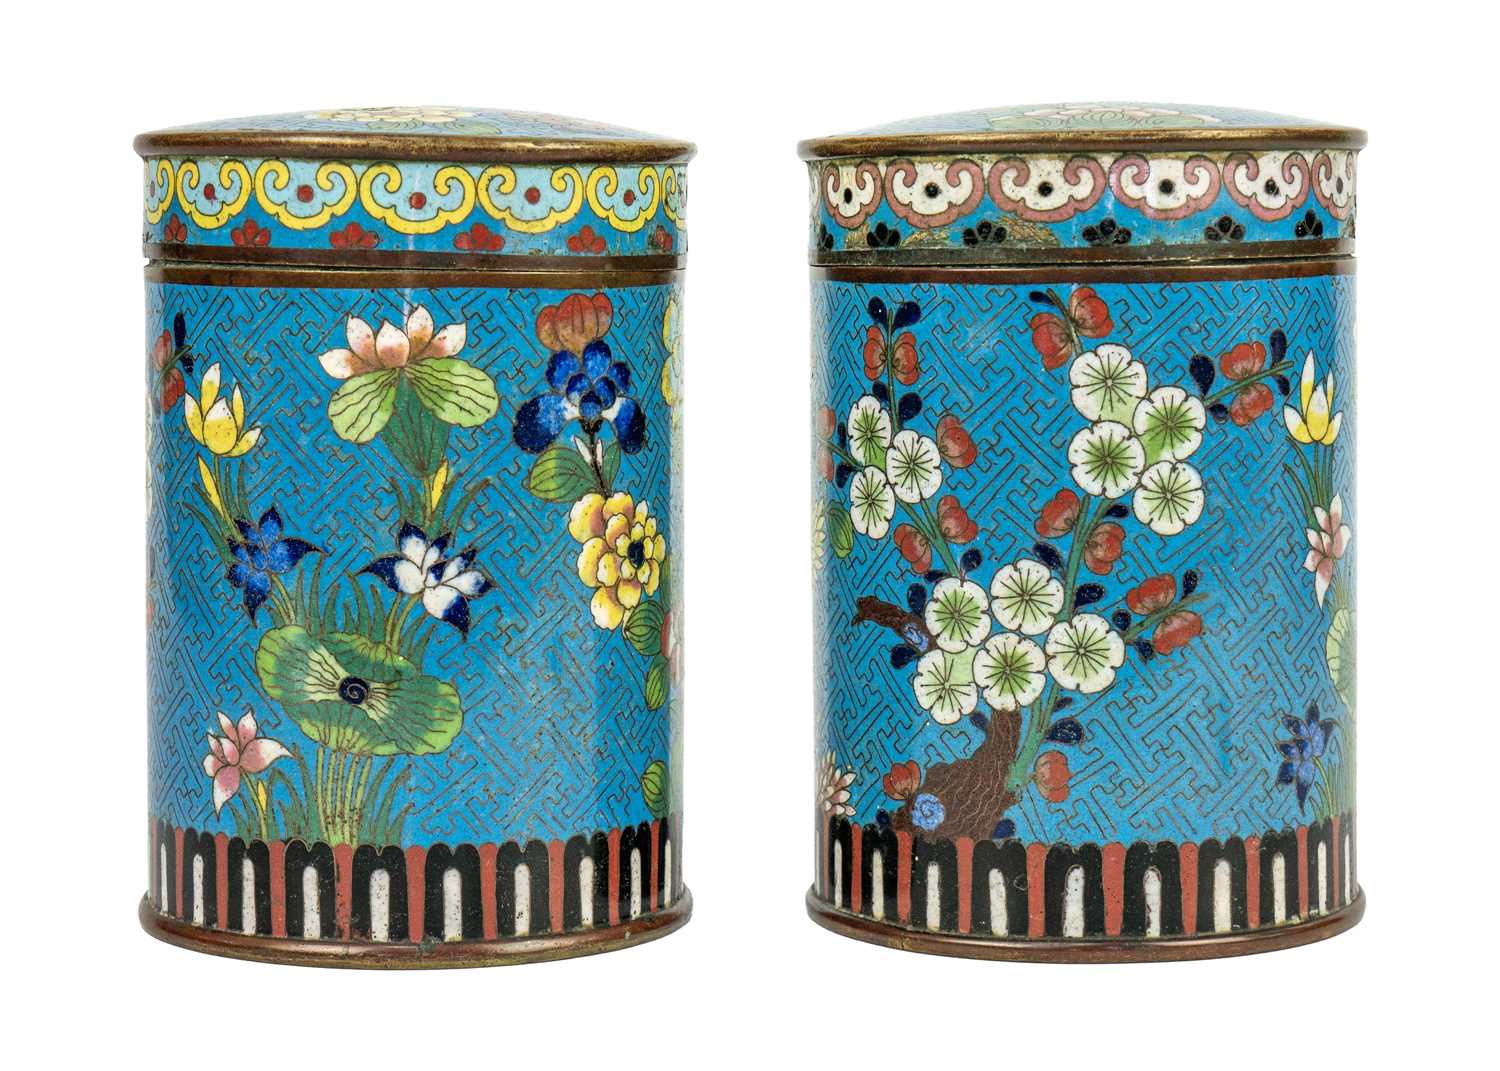 A pair of Chinese cloisonne cylindrical jars and covers, early 19th century. - Image 3 of 6